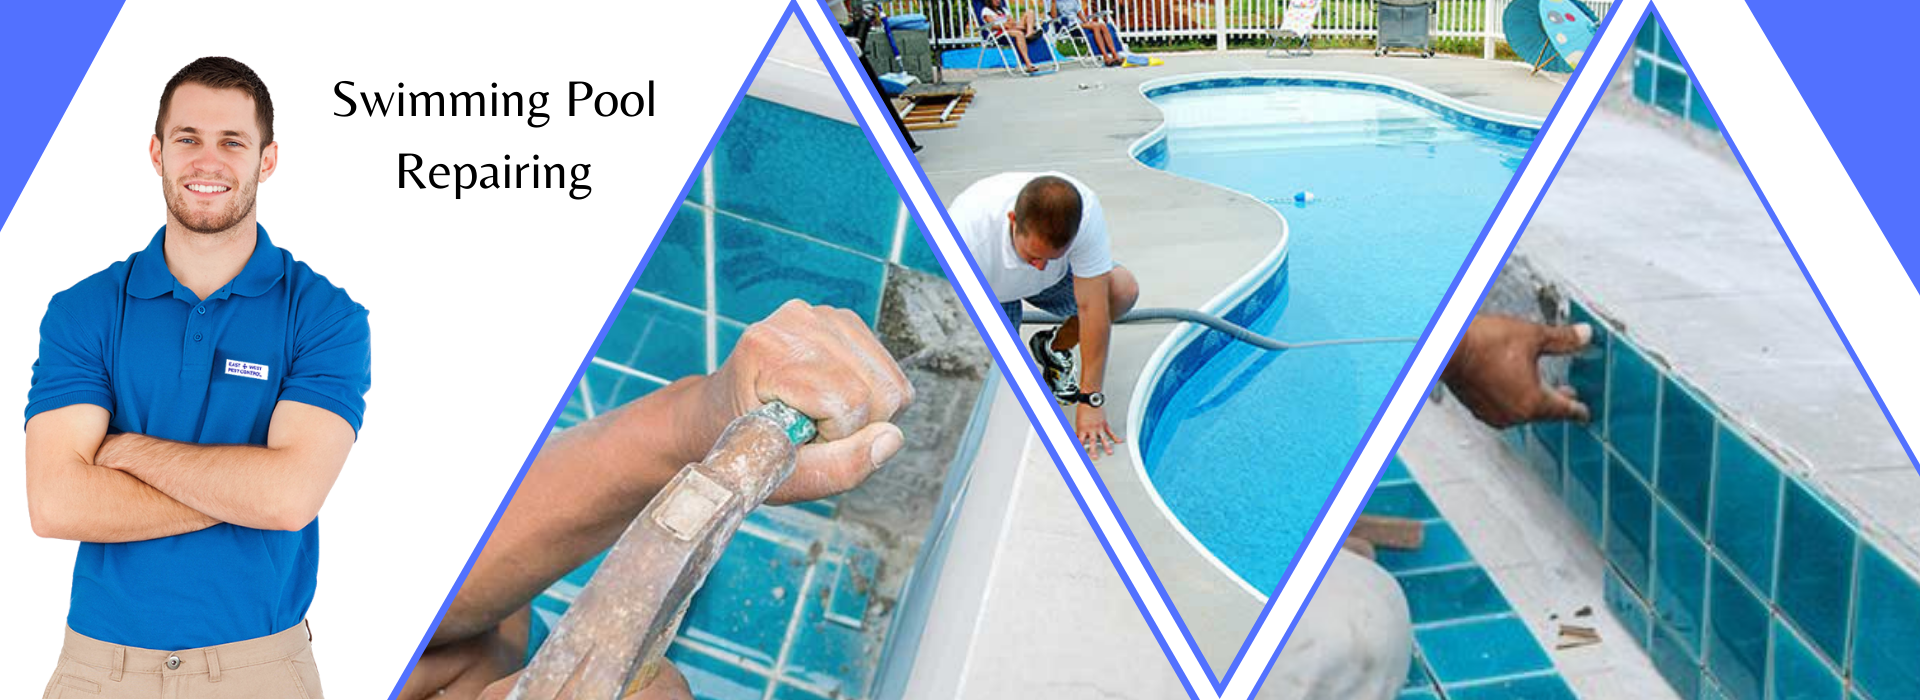 Dan technologies is one of the best swimming pool construction company in Delhi NCR. Their workmanship is perfect and impeccable. We are a trusted trader, supplier and service provider of swimming pool spare parts and best swimming pool construction services in delhi.